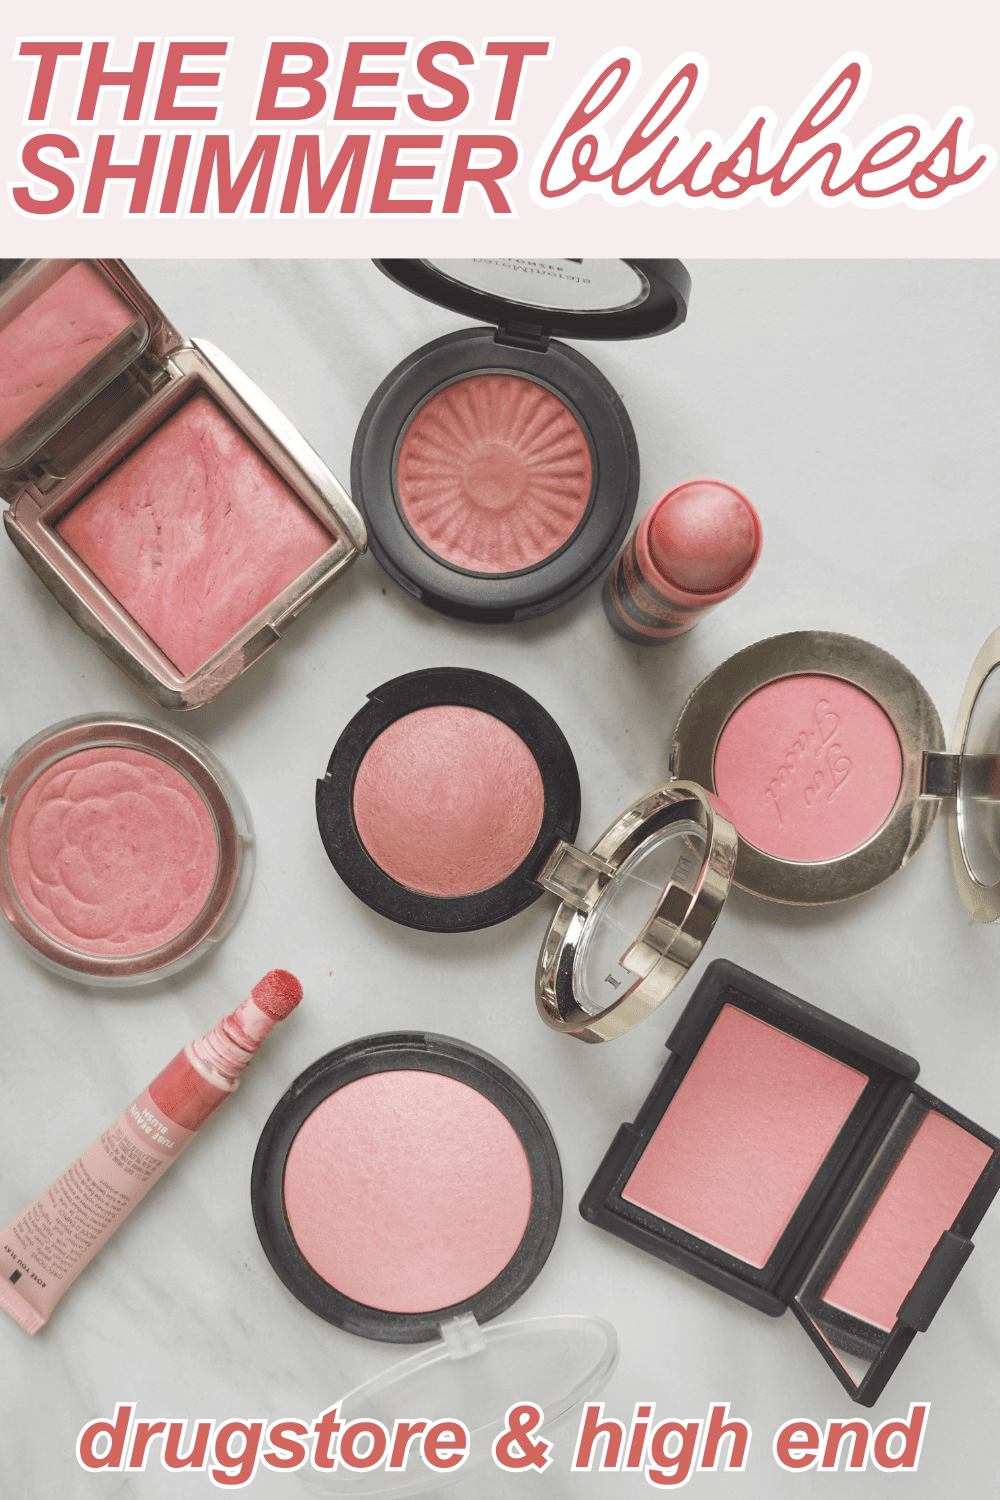 The best shimmer blushes, both drugstore and high end